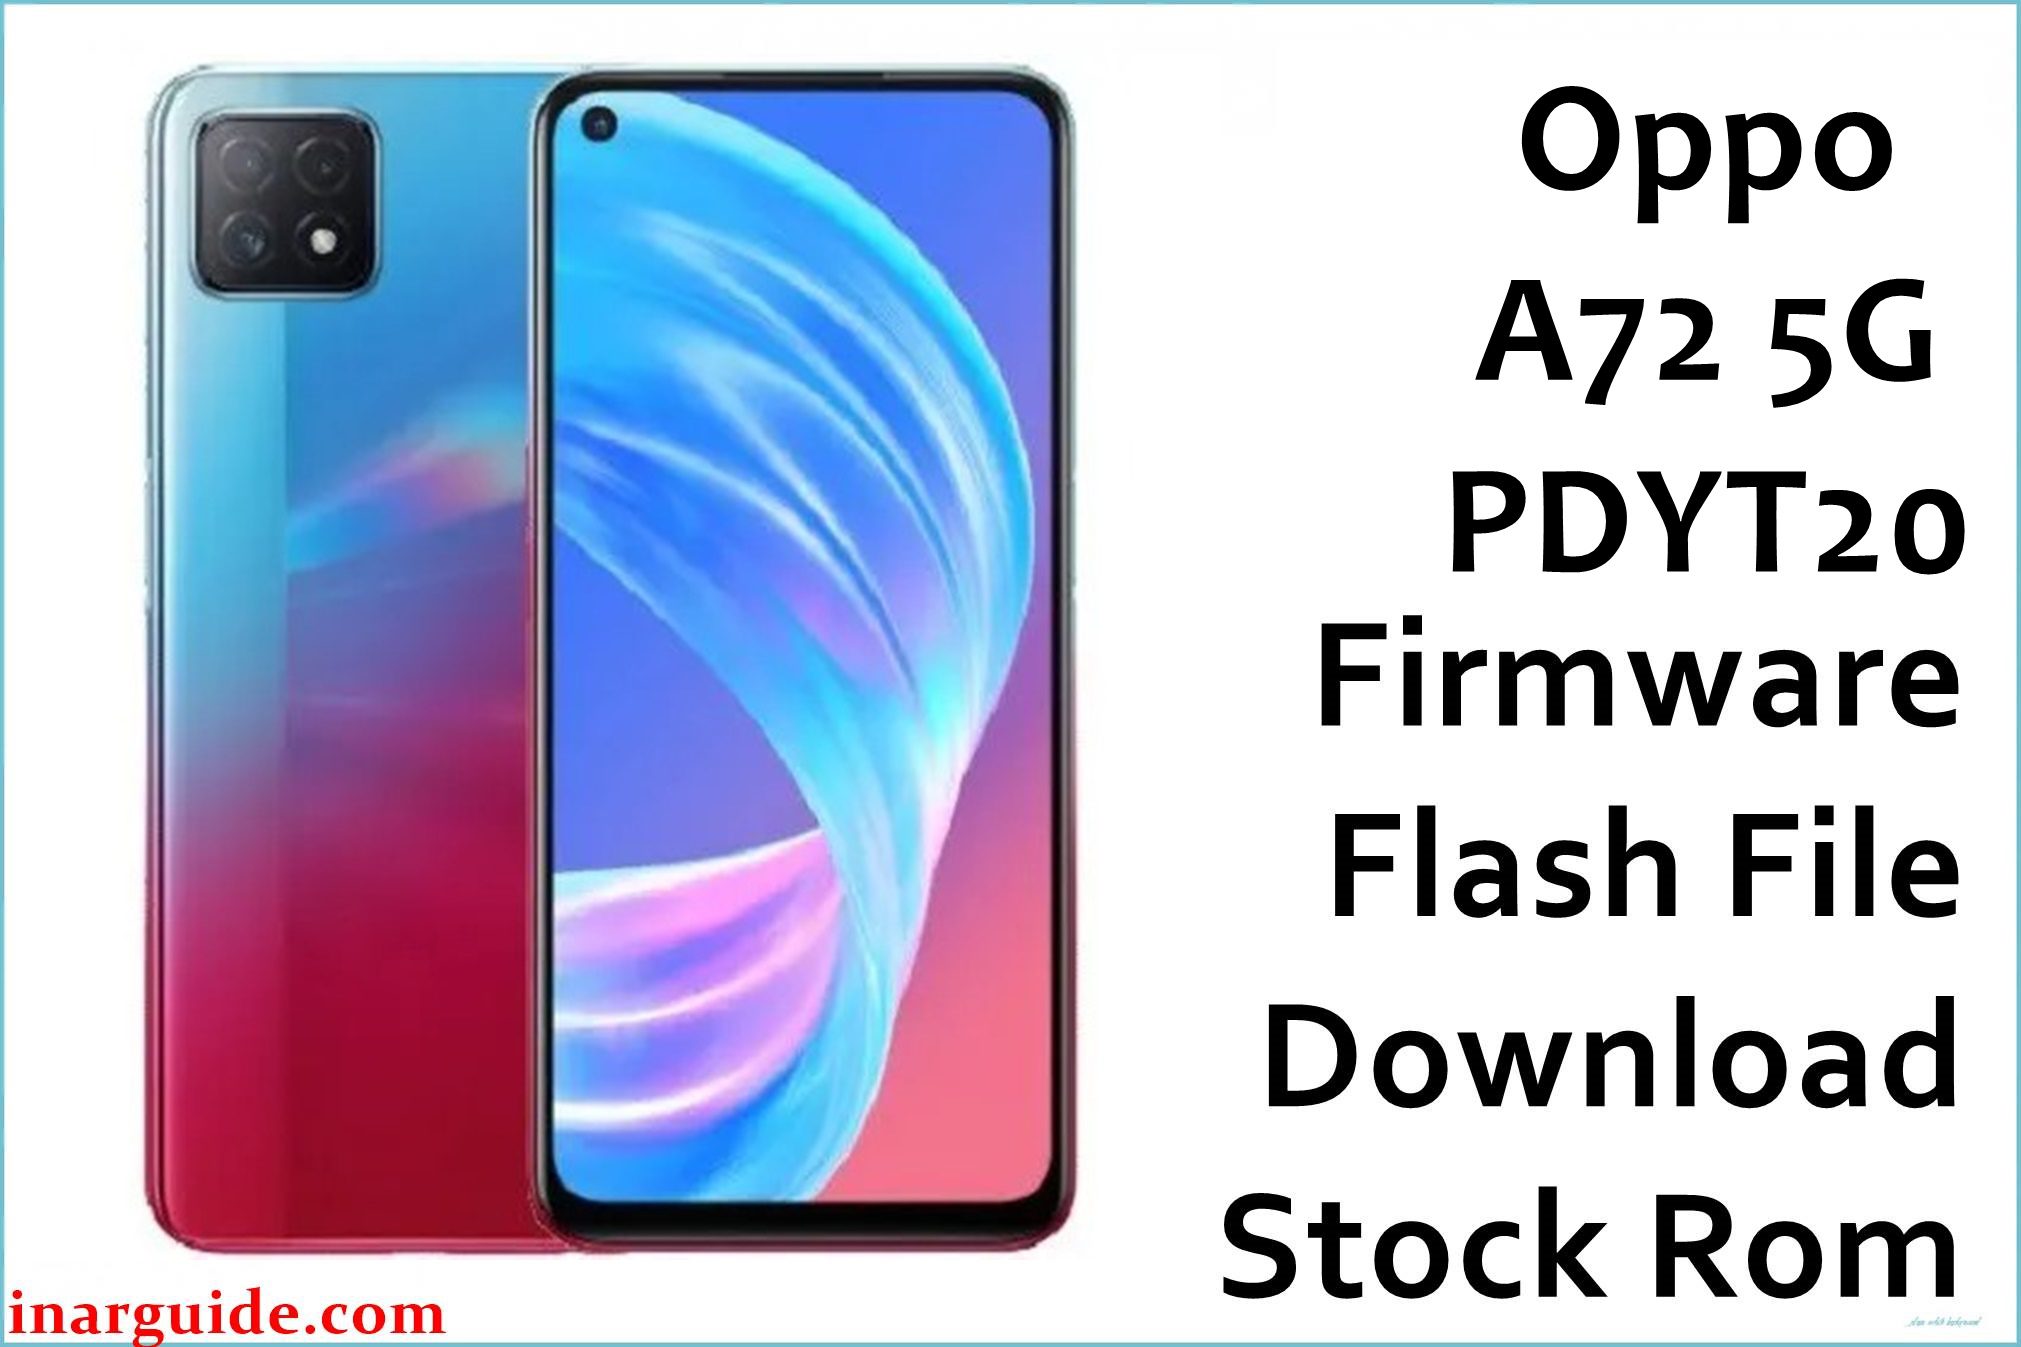 Oppo A72 5G PDYT20